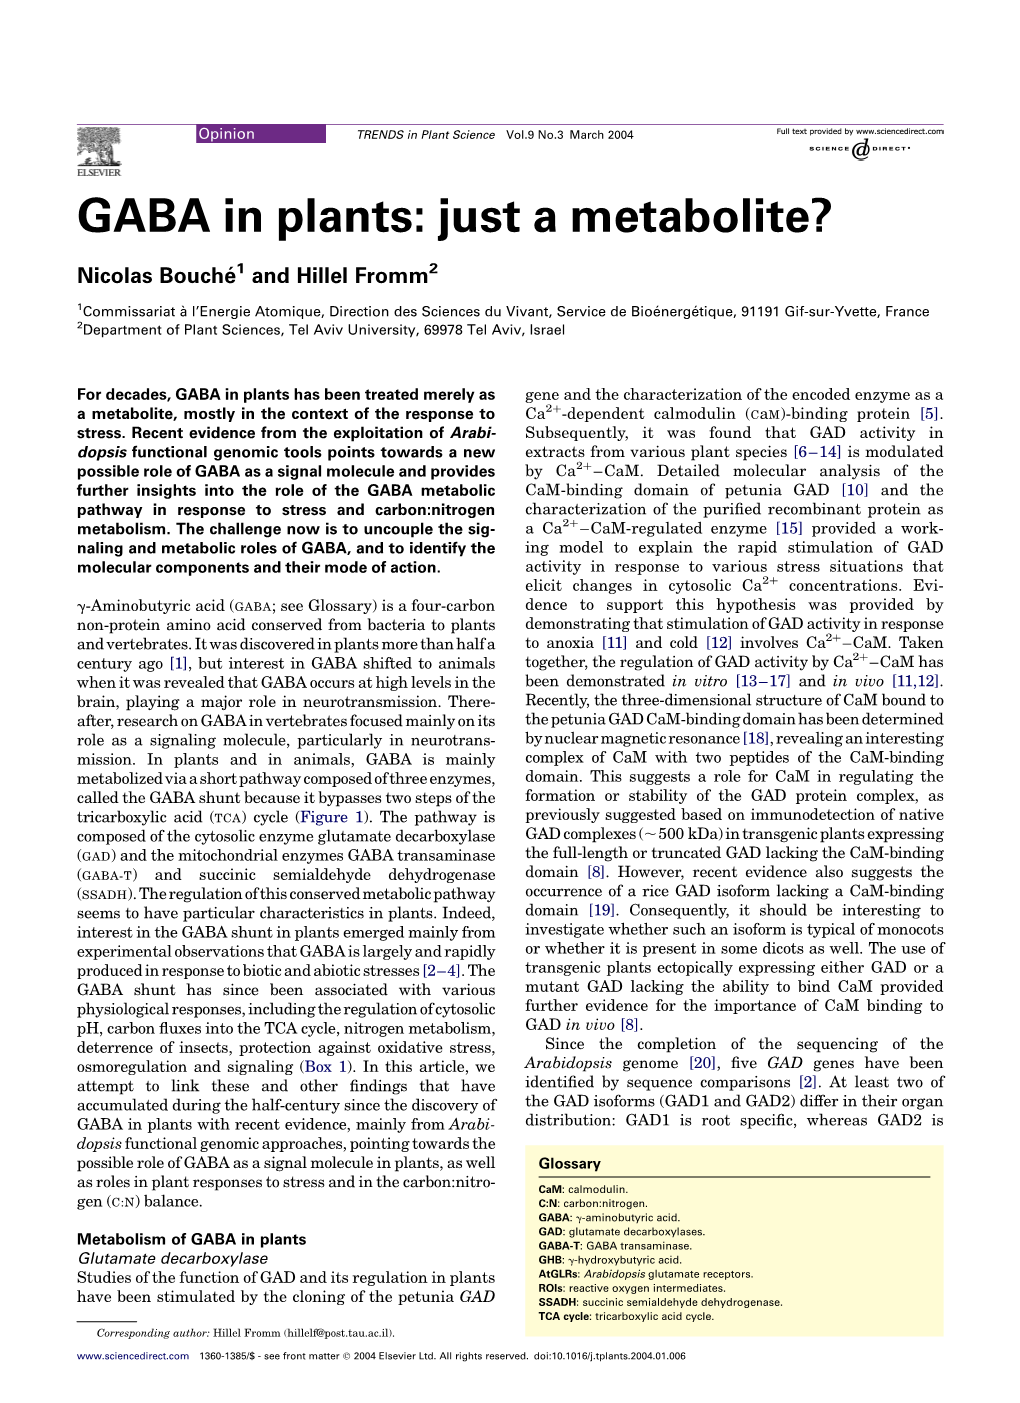 GABA in Plants: Just a Metabolite?